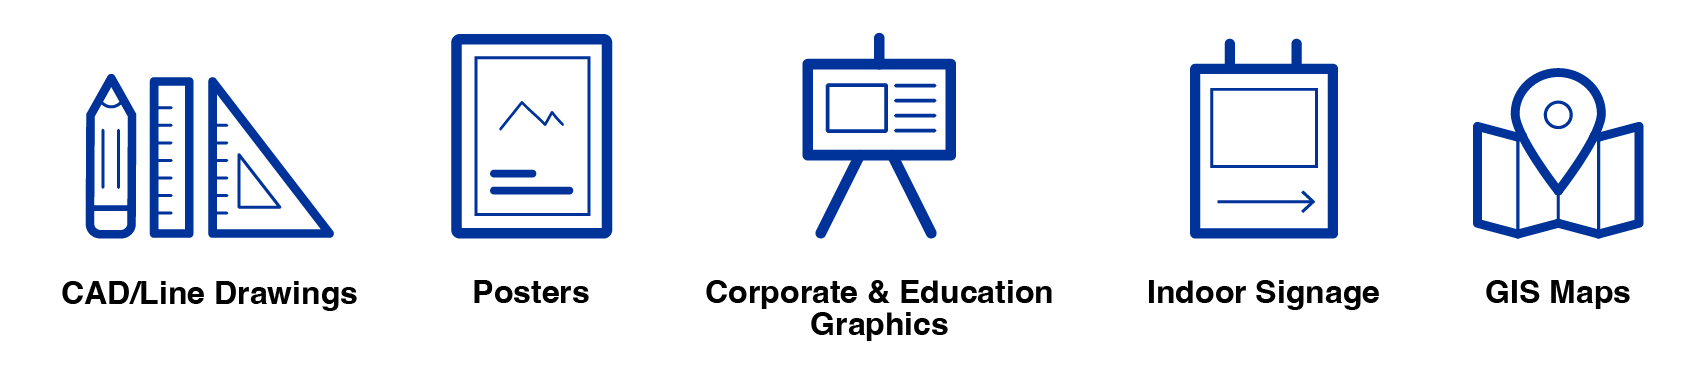 CAD/Line Drawings | Posters | Corporate & Education Graphics | Indoor Signage | GIS Maps